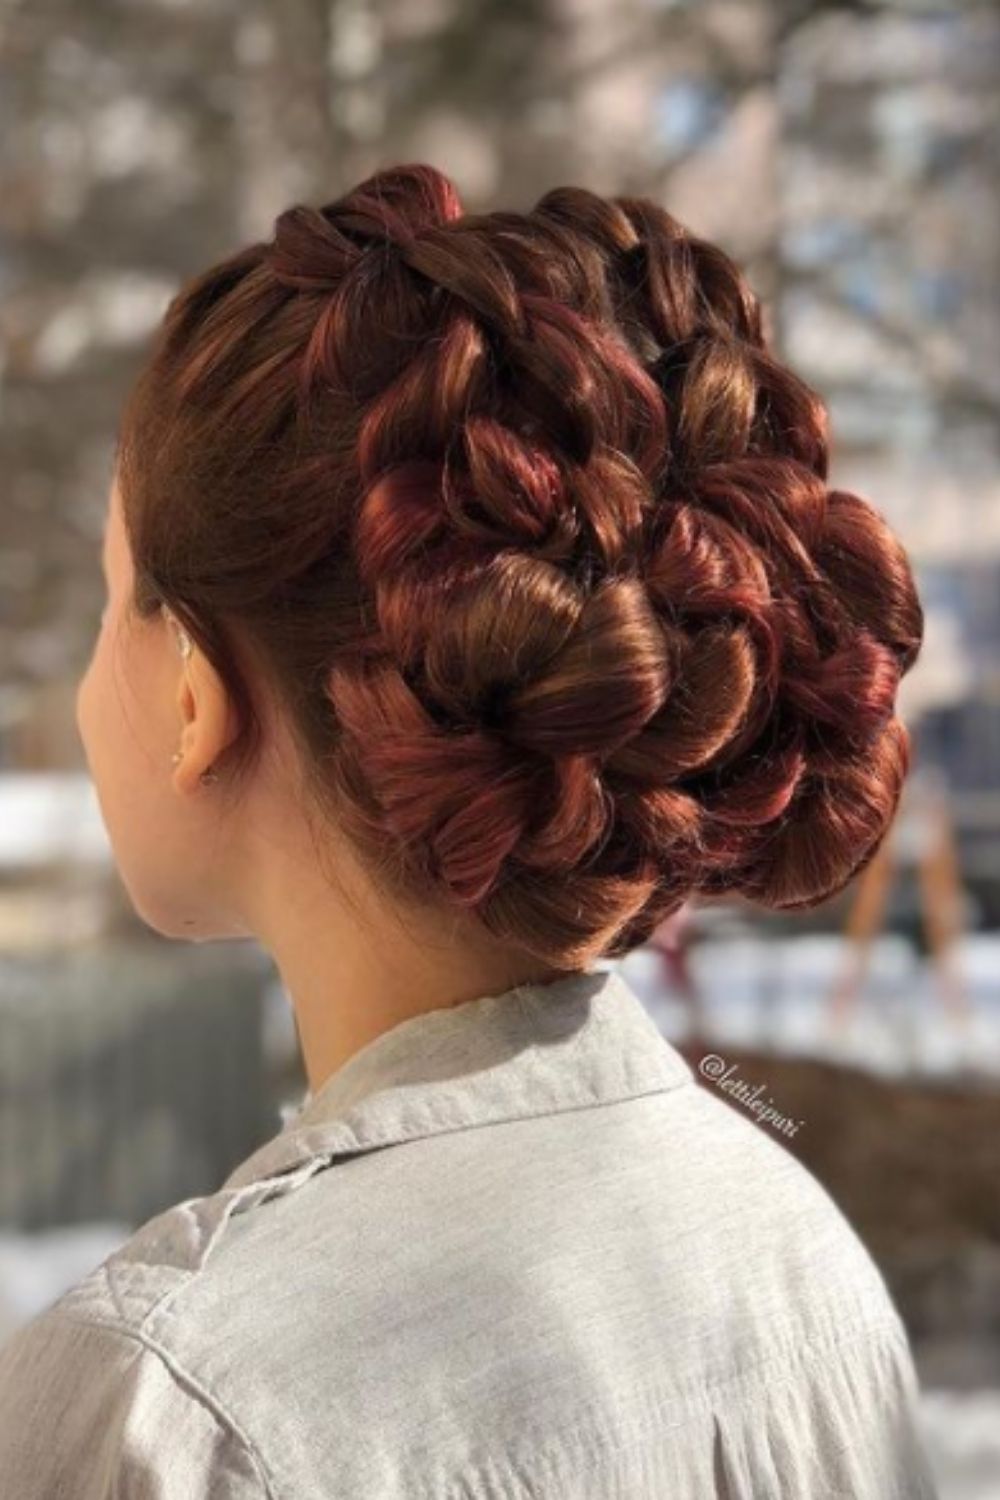 How long does it take to get homecoming hairstyles updo with braids 